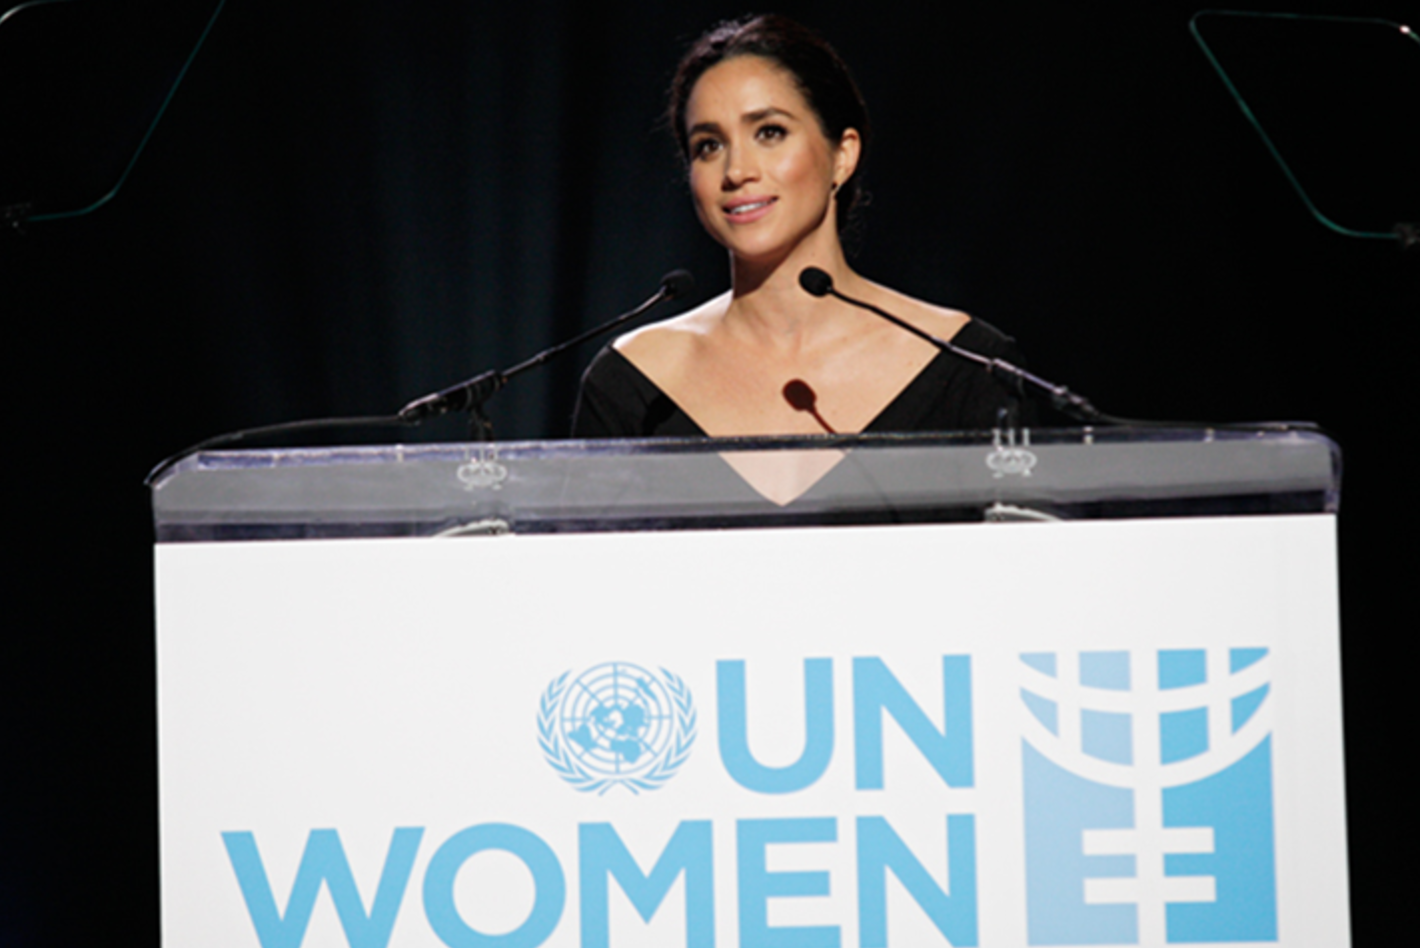 ENTITY shares our favorite star celeb of the week: Meghan Markle. Here are some of her top inspirational quotes.